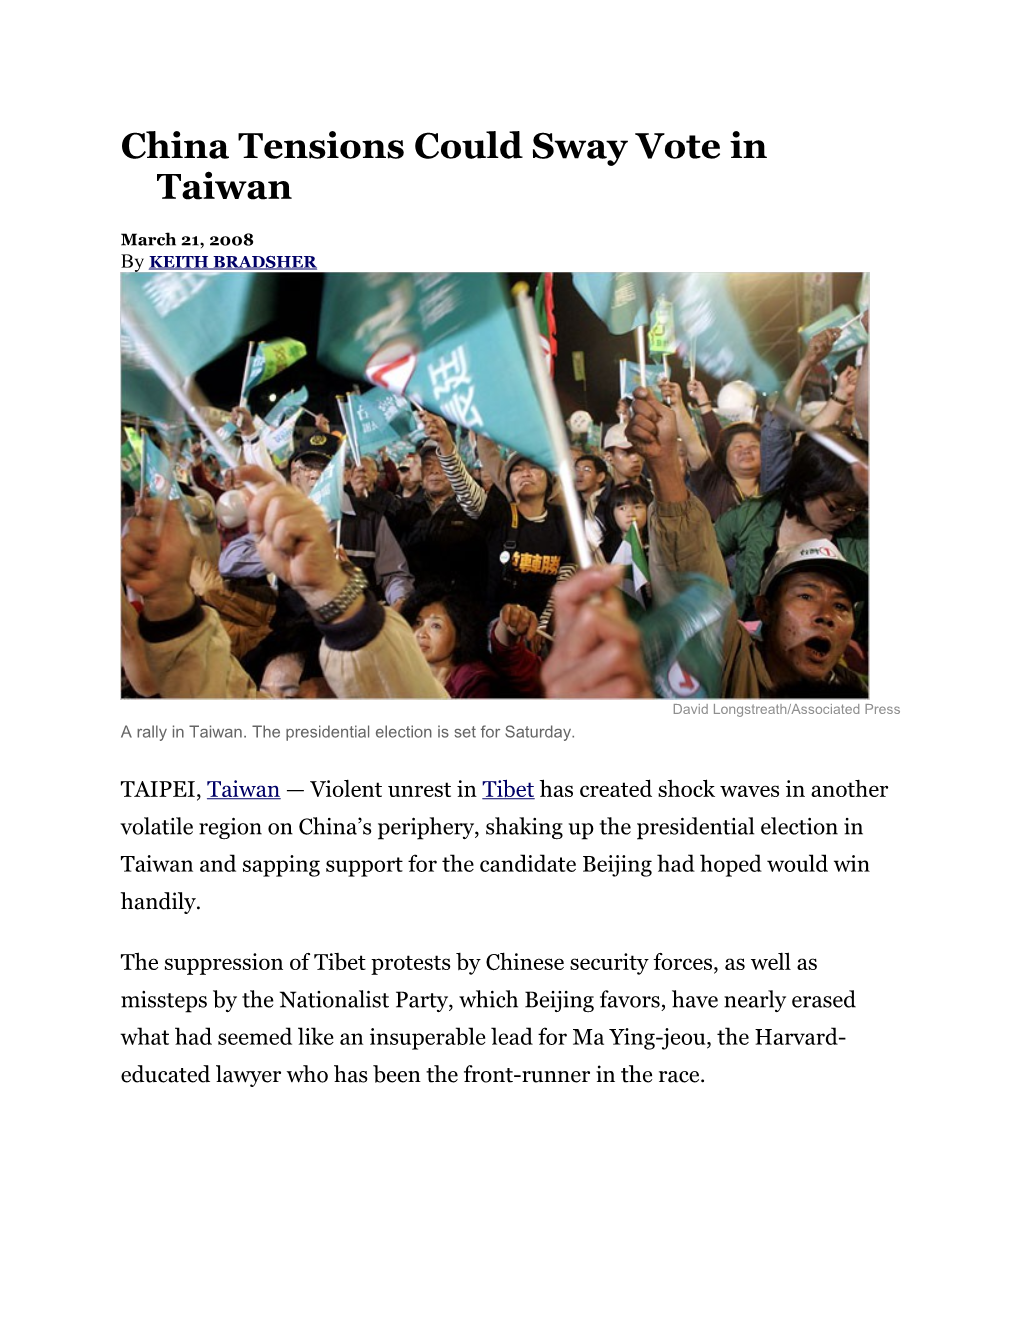 China Tensions Could Sway Vote in Taiwan